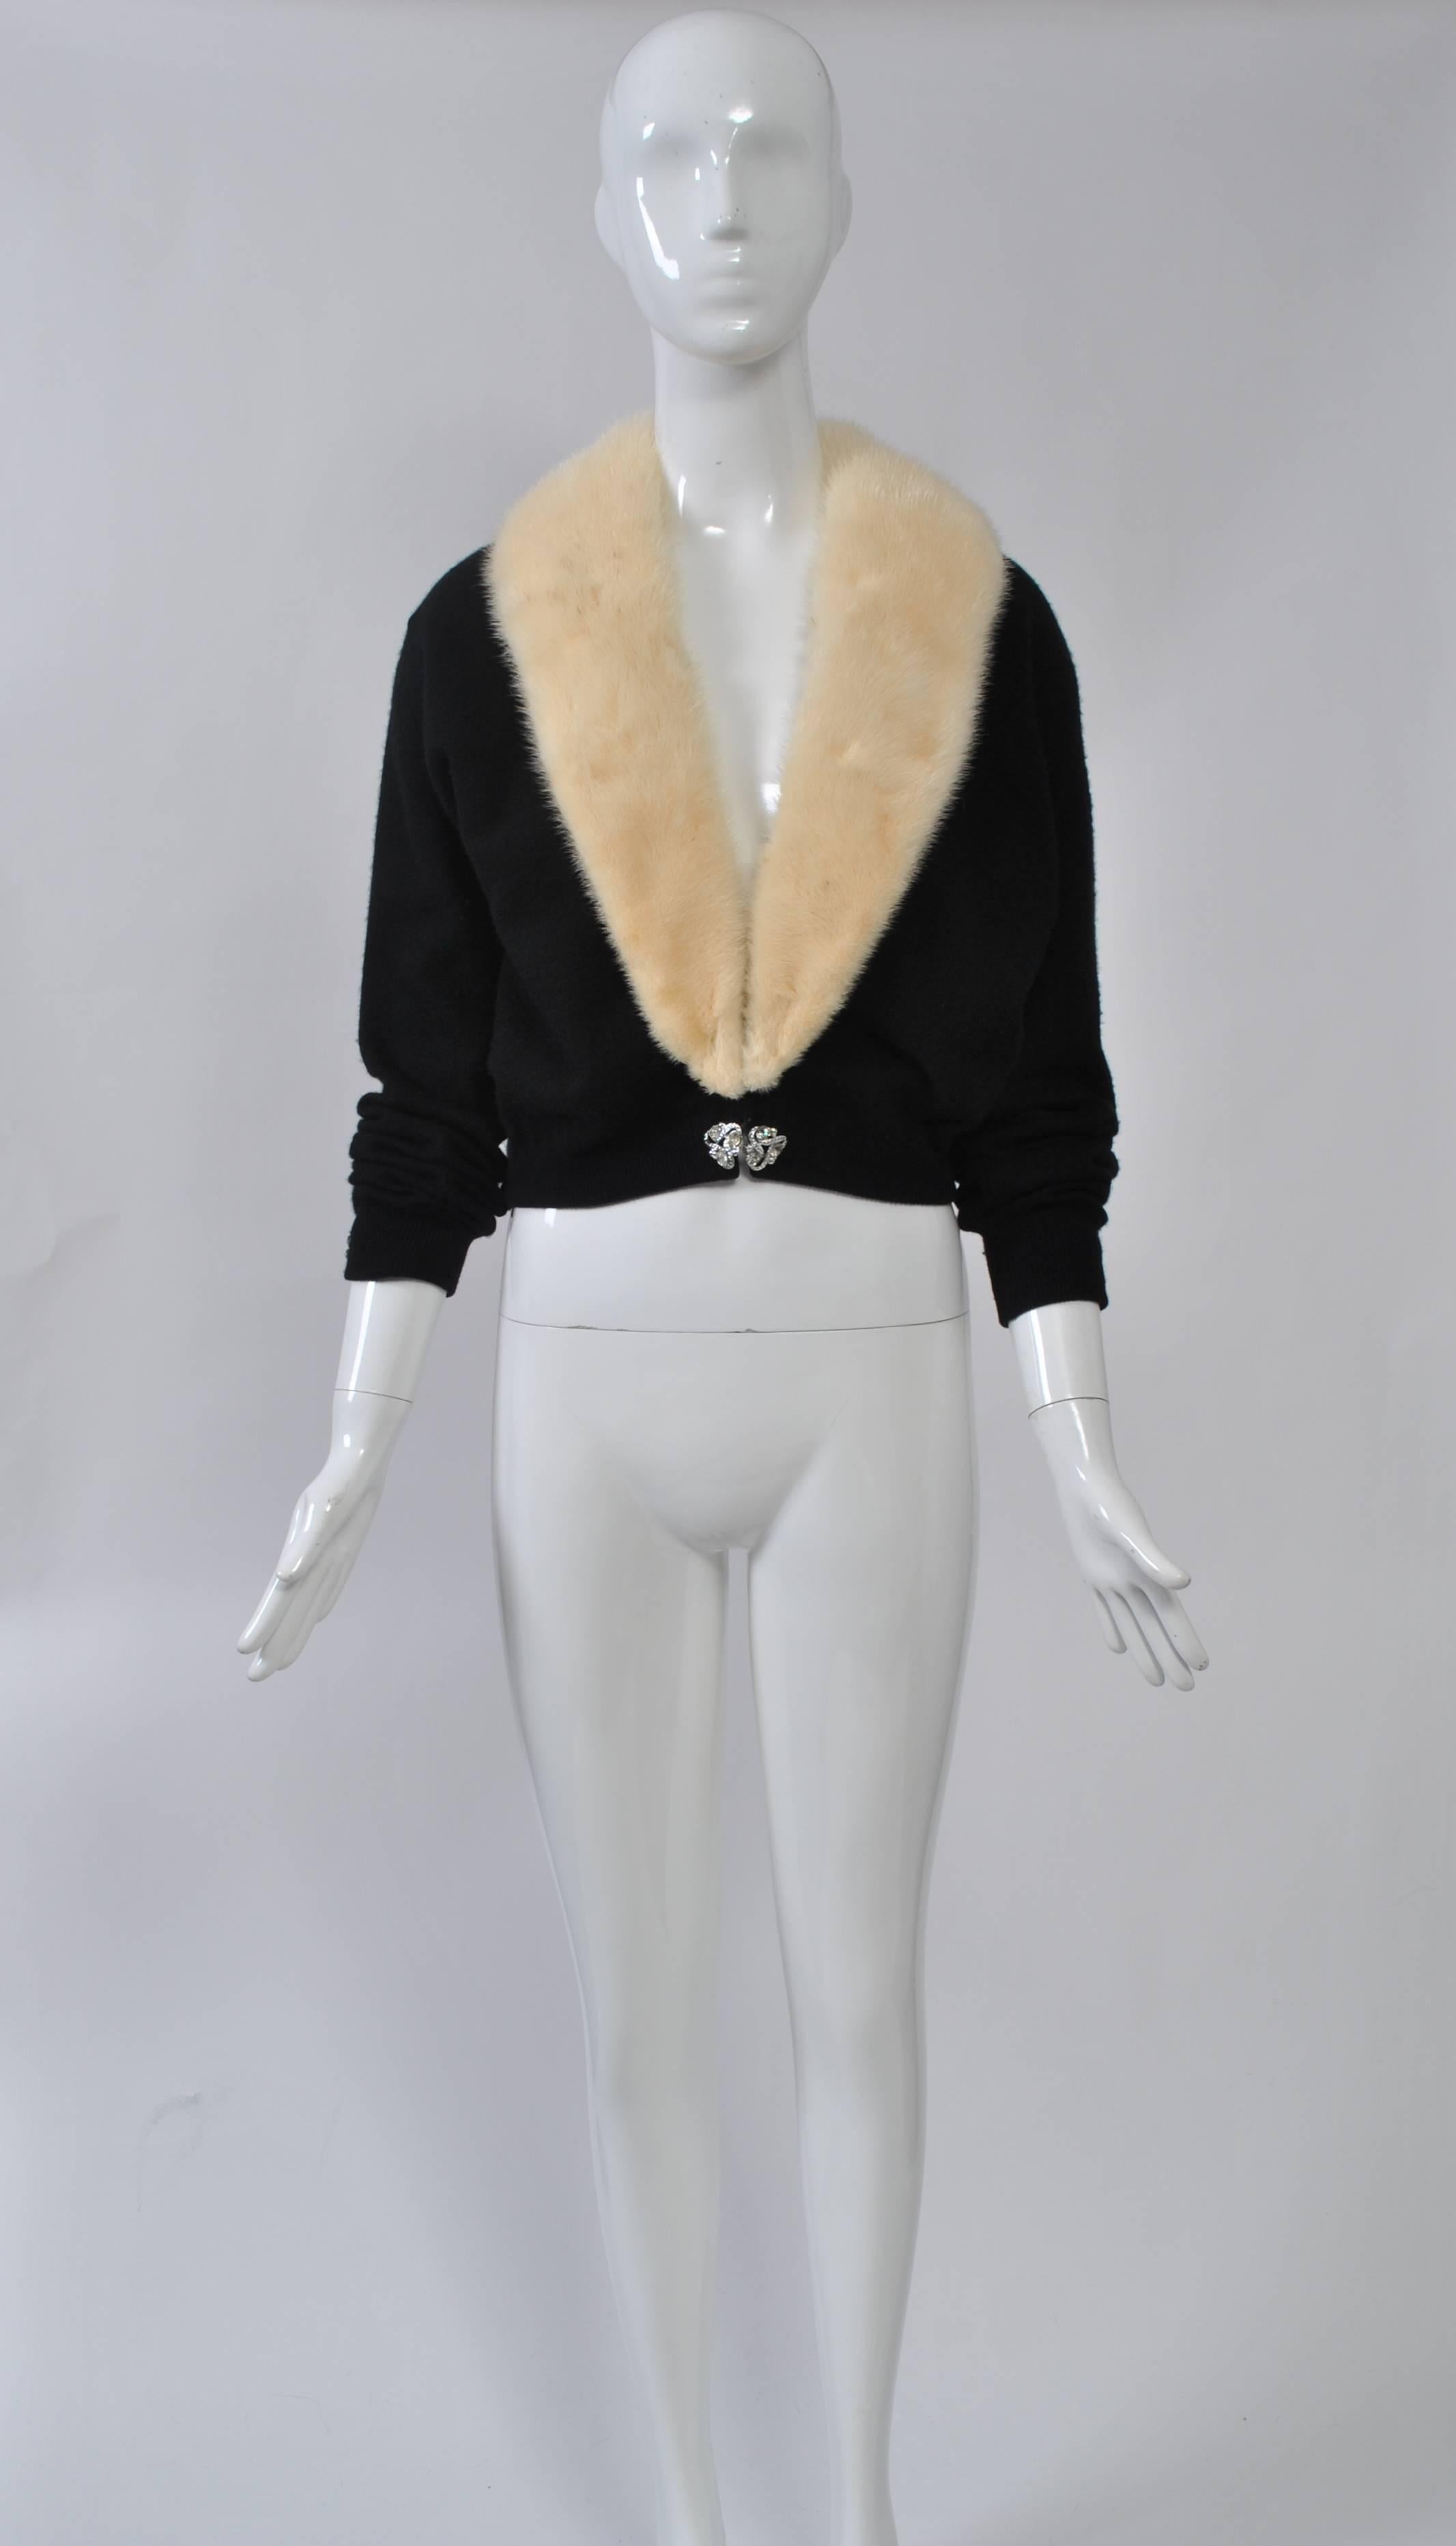 Black cashmere cardigan with detachable white mink collar. Rhinestone clasp at waist, rhinestone buttons at wrist. Collar attaches to sweater with snapped tape and can be removed for cleaning the sweater. Sheer lining with lace.